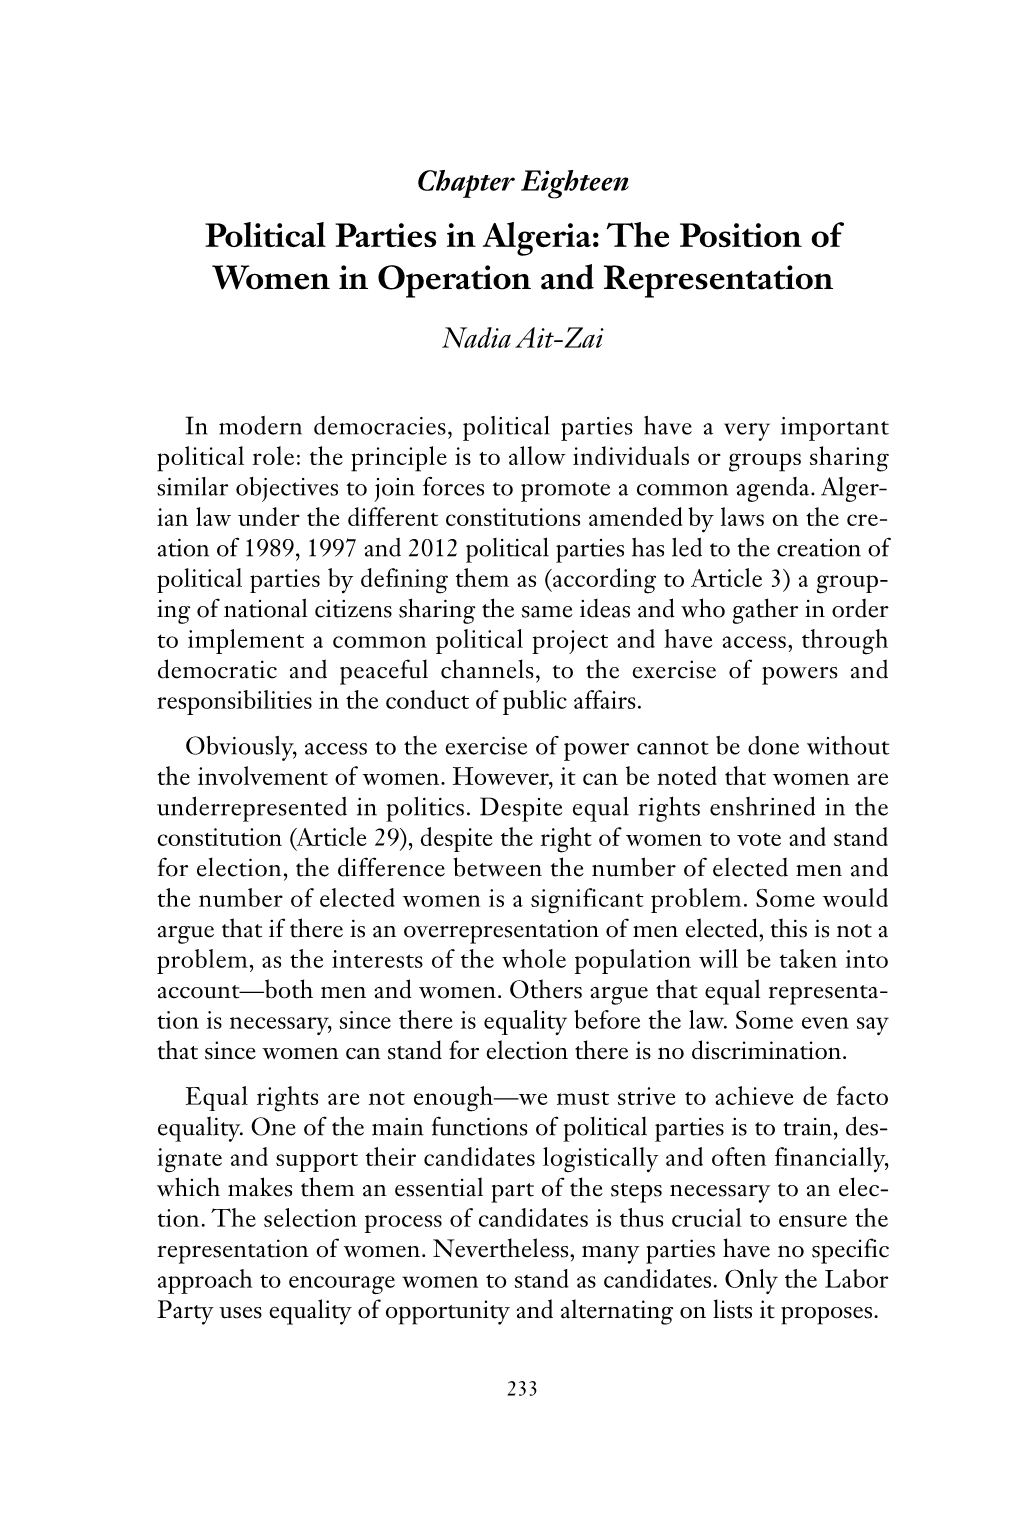 Political Parties in Algeria: the Position of Women in Operation and Representation